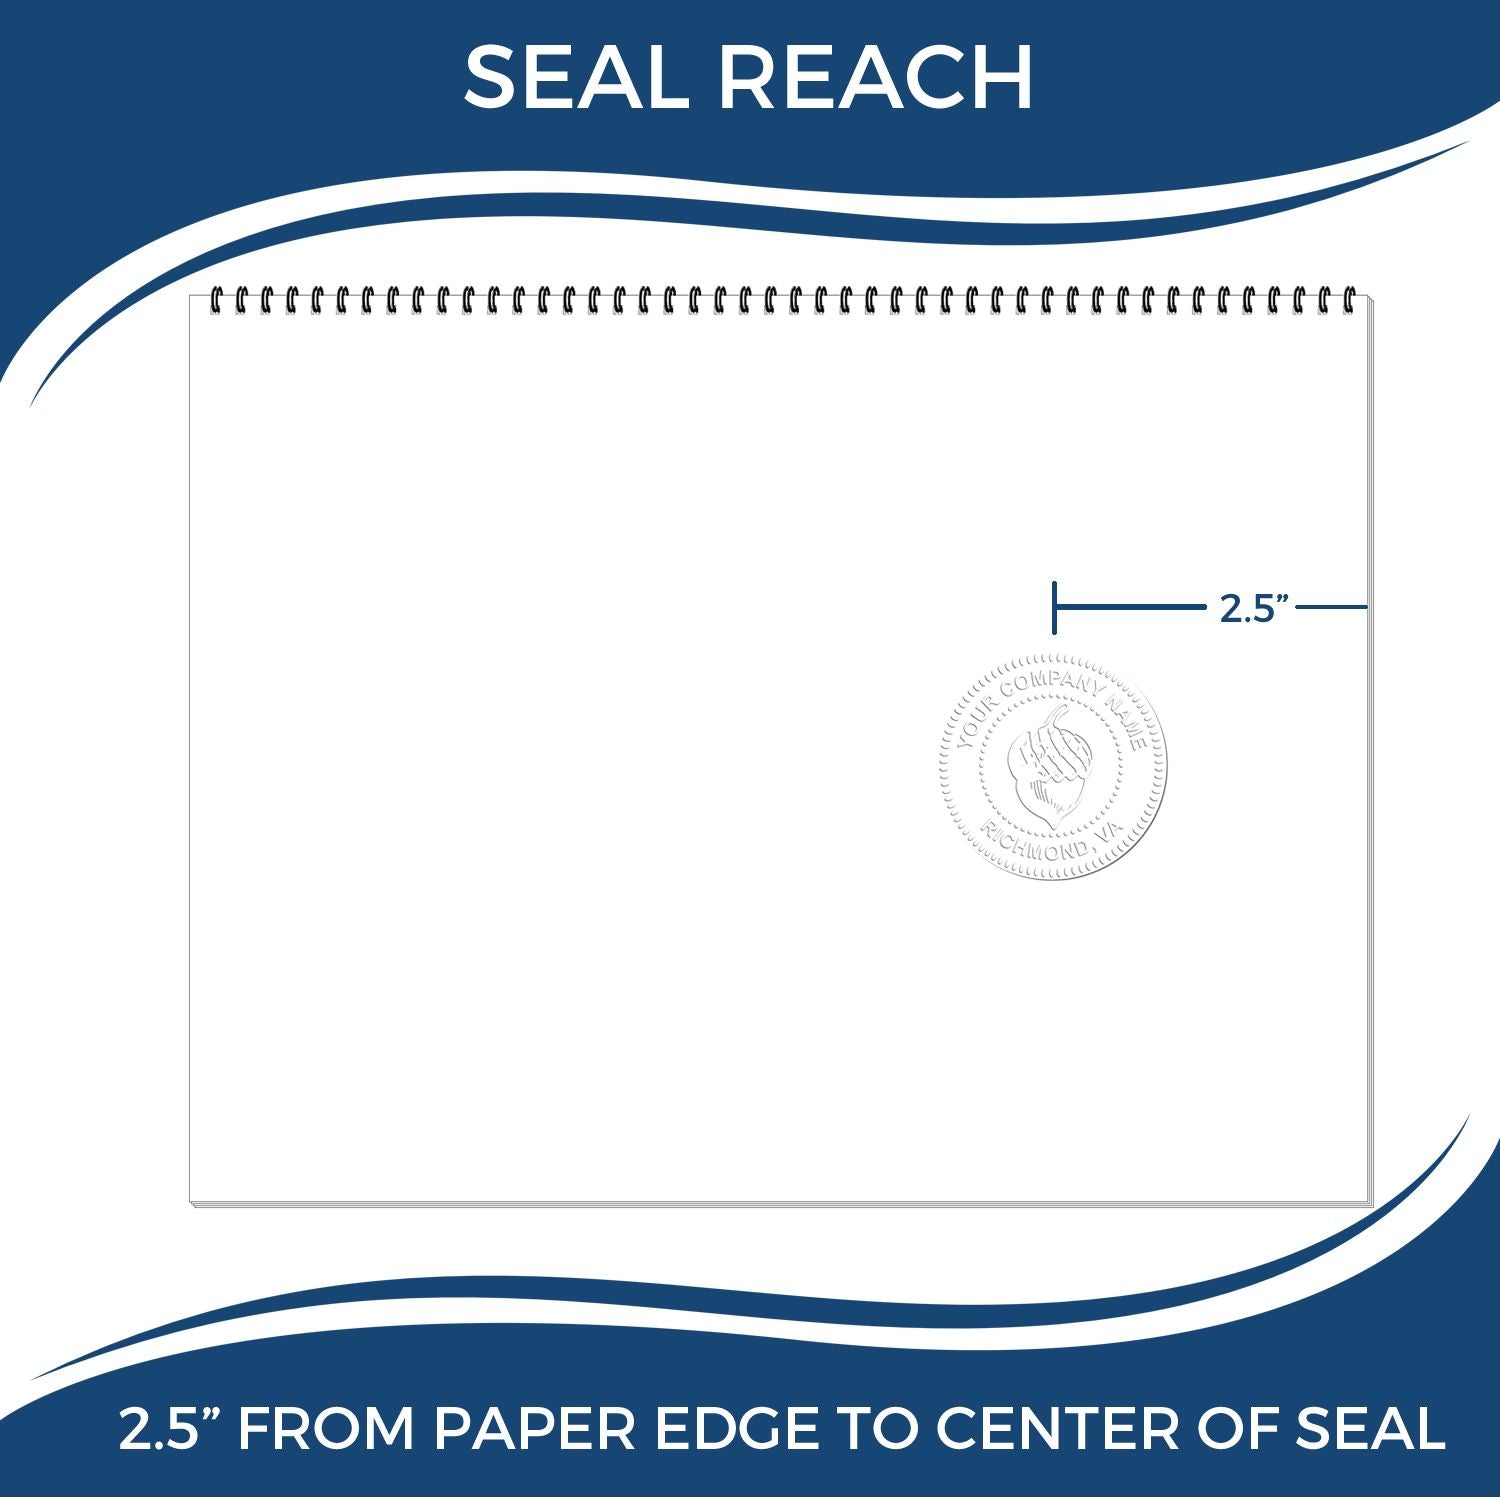 An infographic showing the seal reach which is represented by a ruler and a miniature seal image of the Heavy Duty Tennessee Landscape Architect Cast Iron Embosser